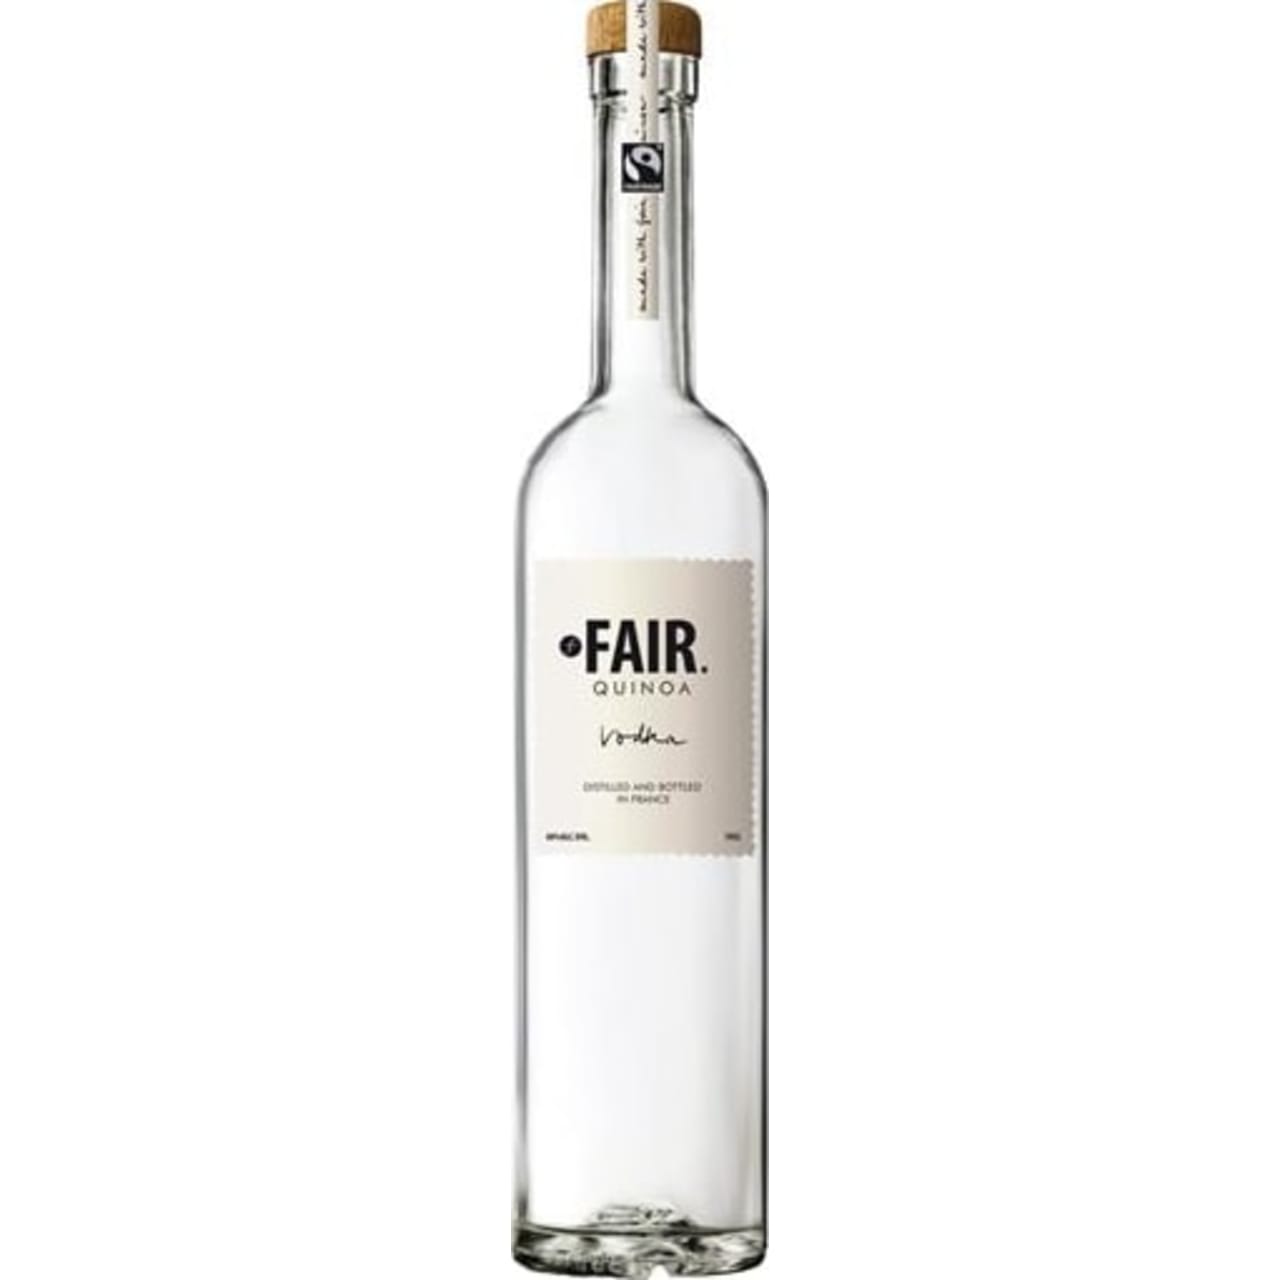 FAIR. Vodka is a Fair Trade premium vodka made with quinoa as its base grain. Very smooth, fruity, spicy vodka that will shine with a nice chill or in martinis.